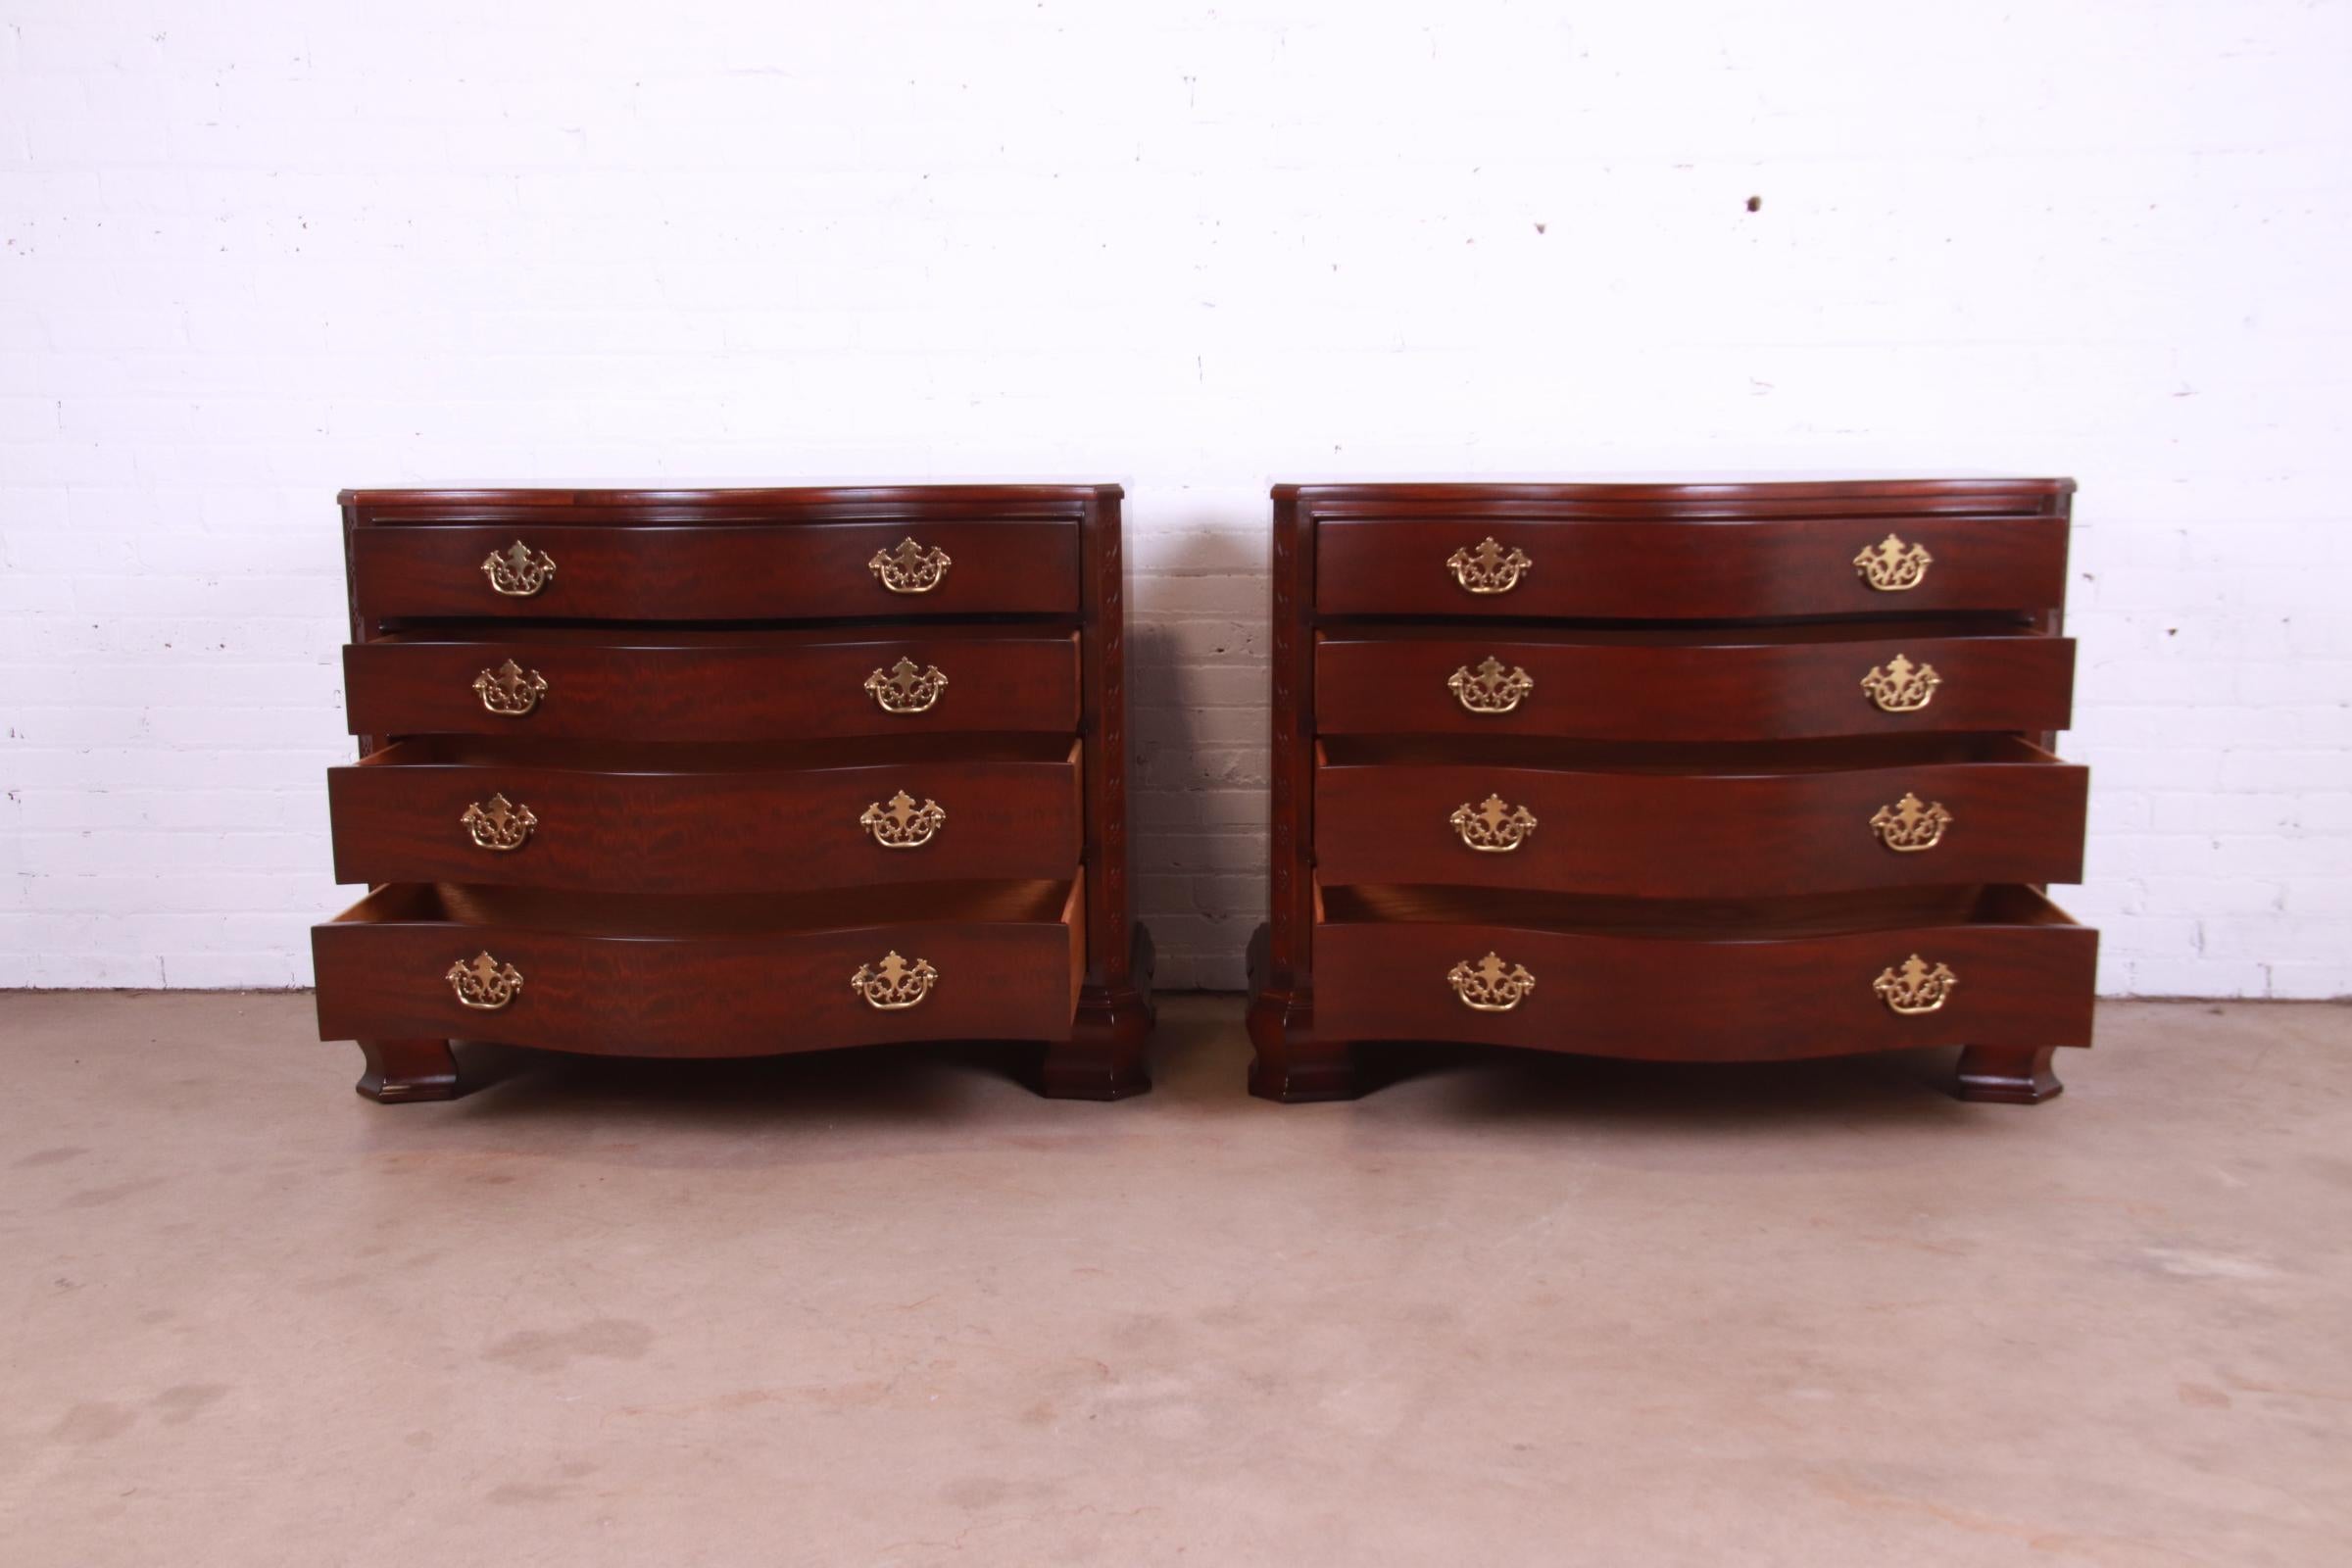 Baker Furniture Chippendale Carved Mahogany Serpentine Dresser Chests, Pair For Sale 2